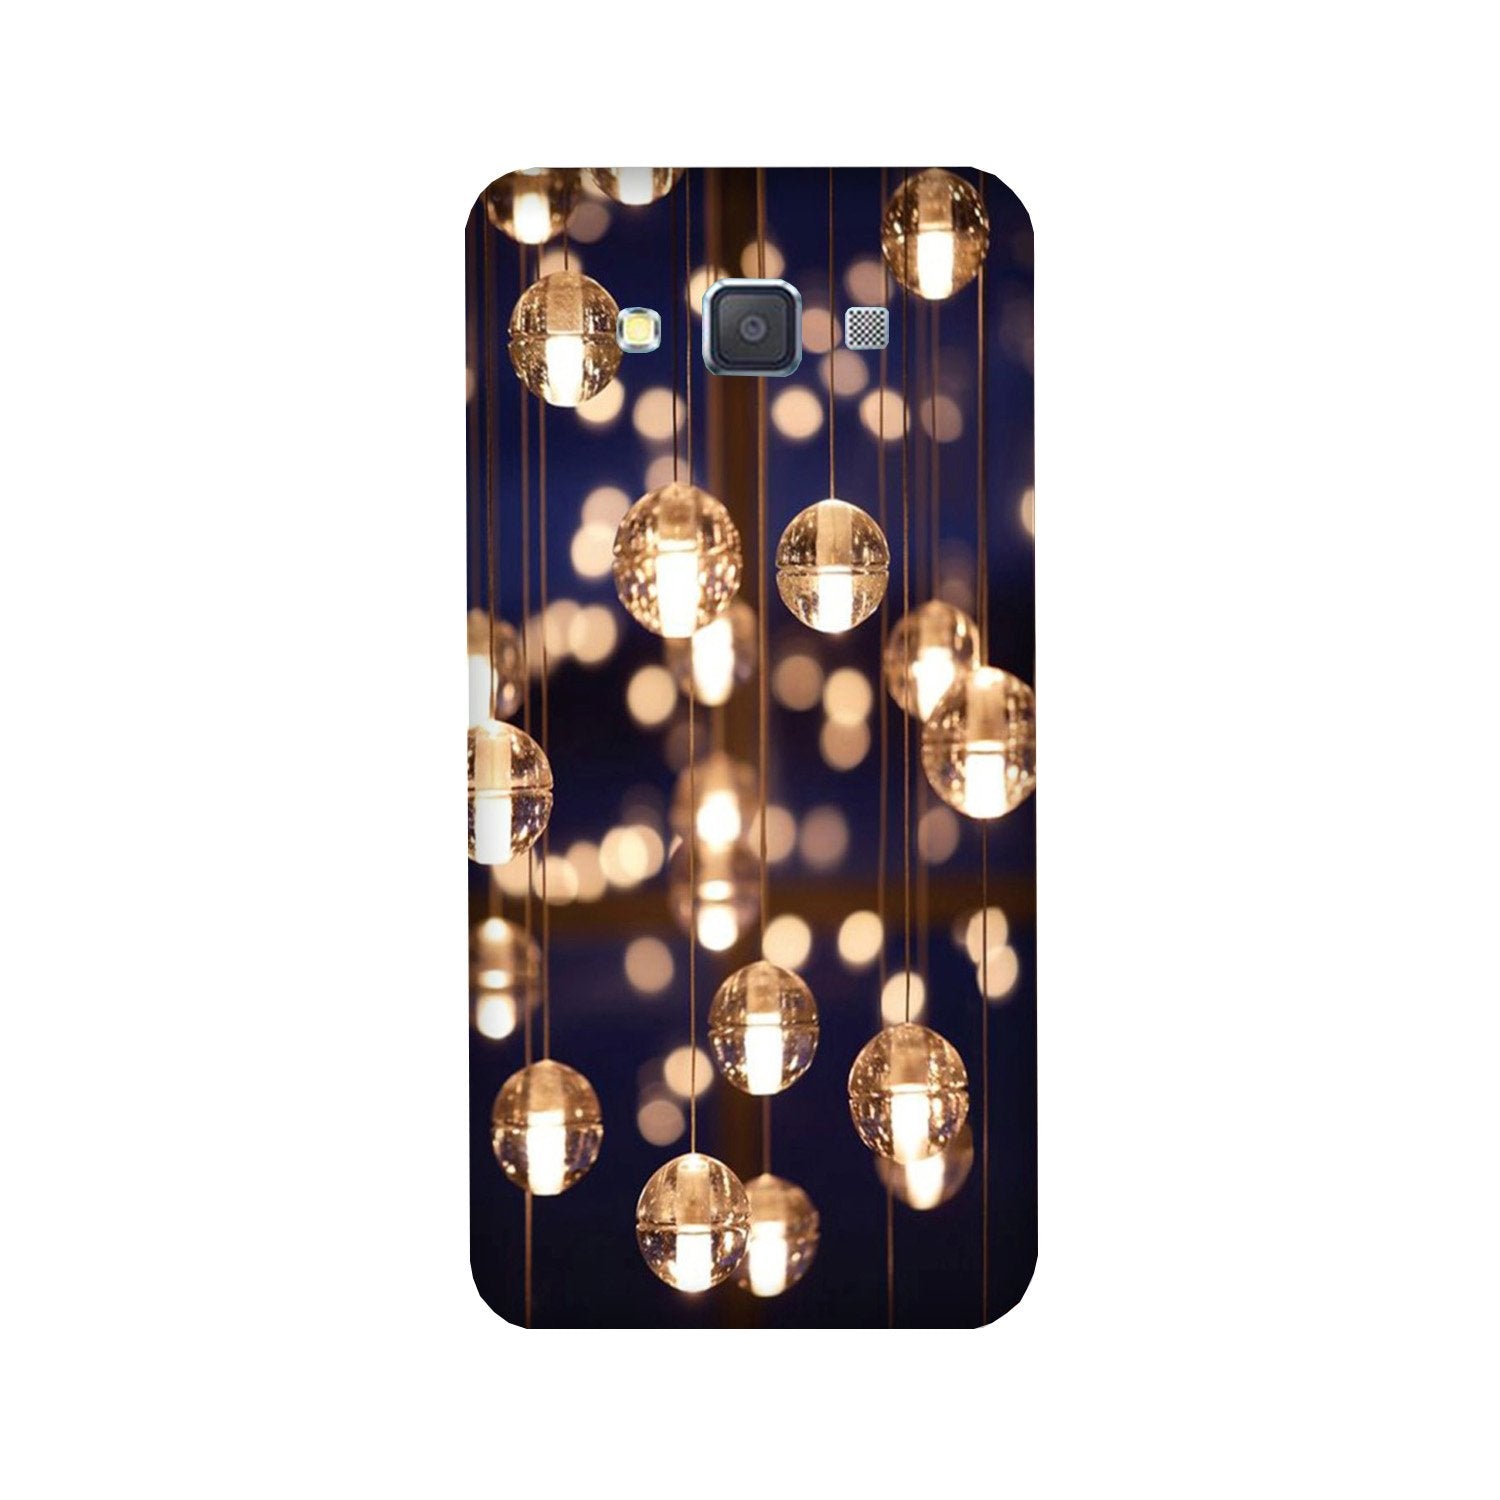 Party Bulb2 Case for Galaxy ON7/ON7 Pro